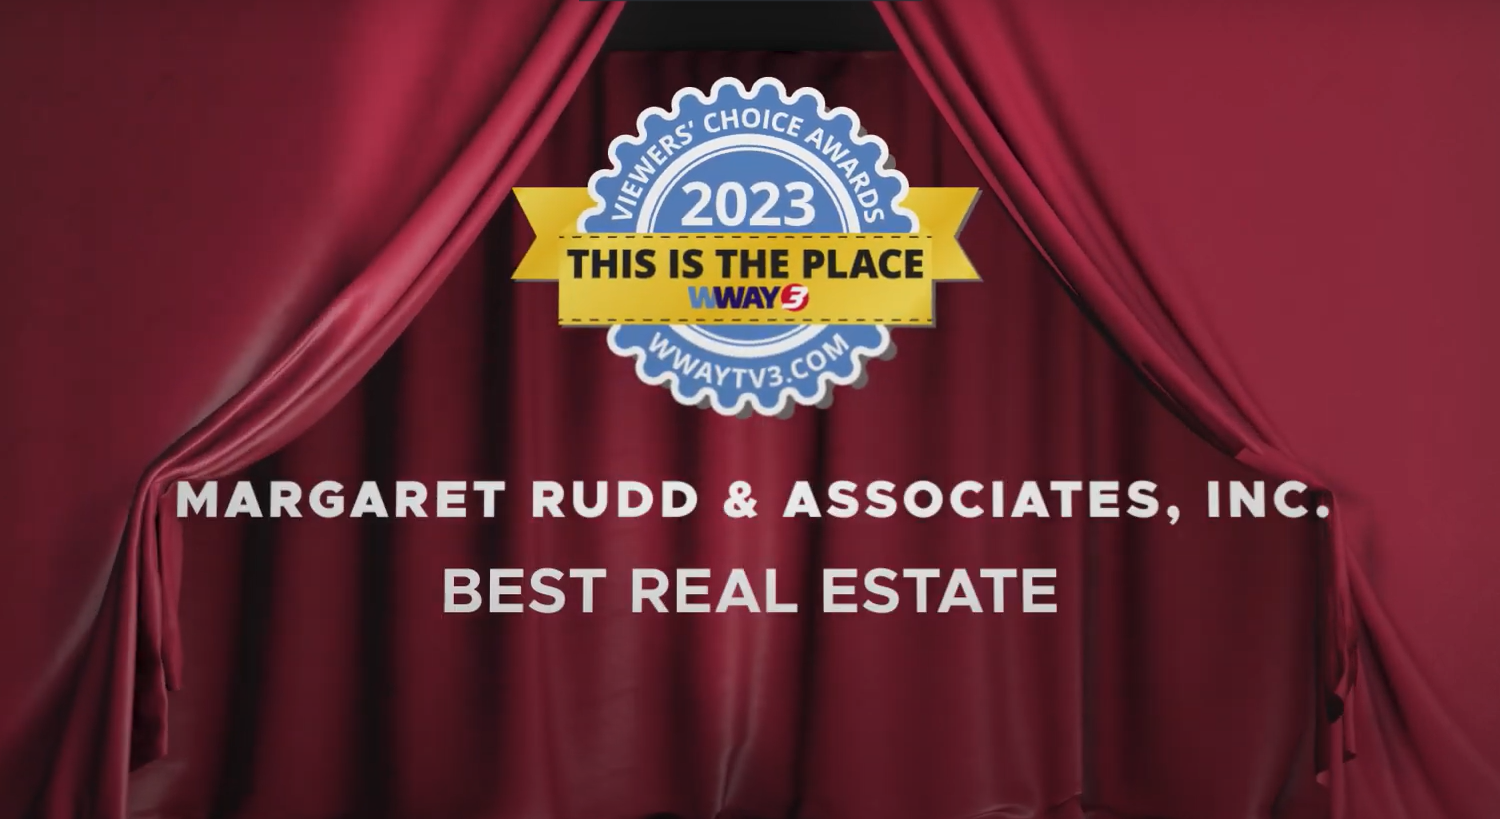 MRA Voted Best Real Estate in 2023 This Is The Place Viewers Choice Awards